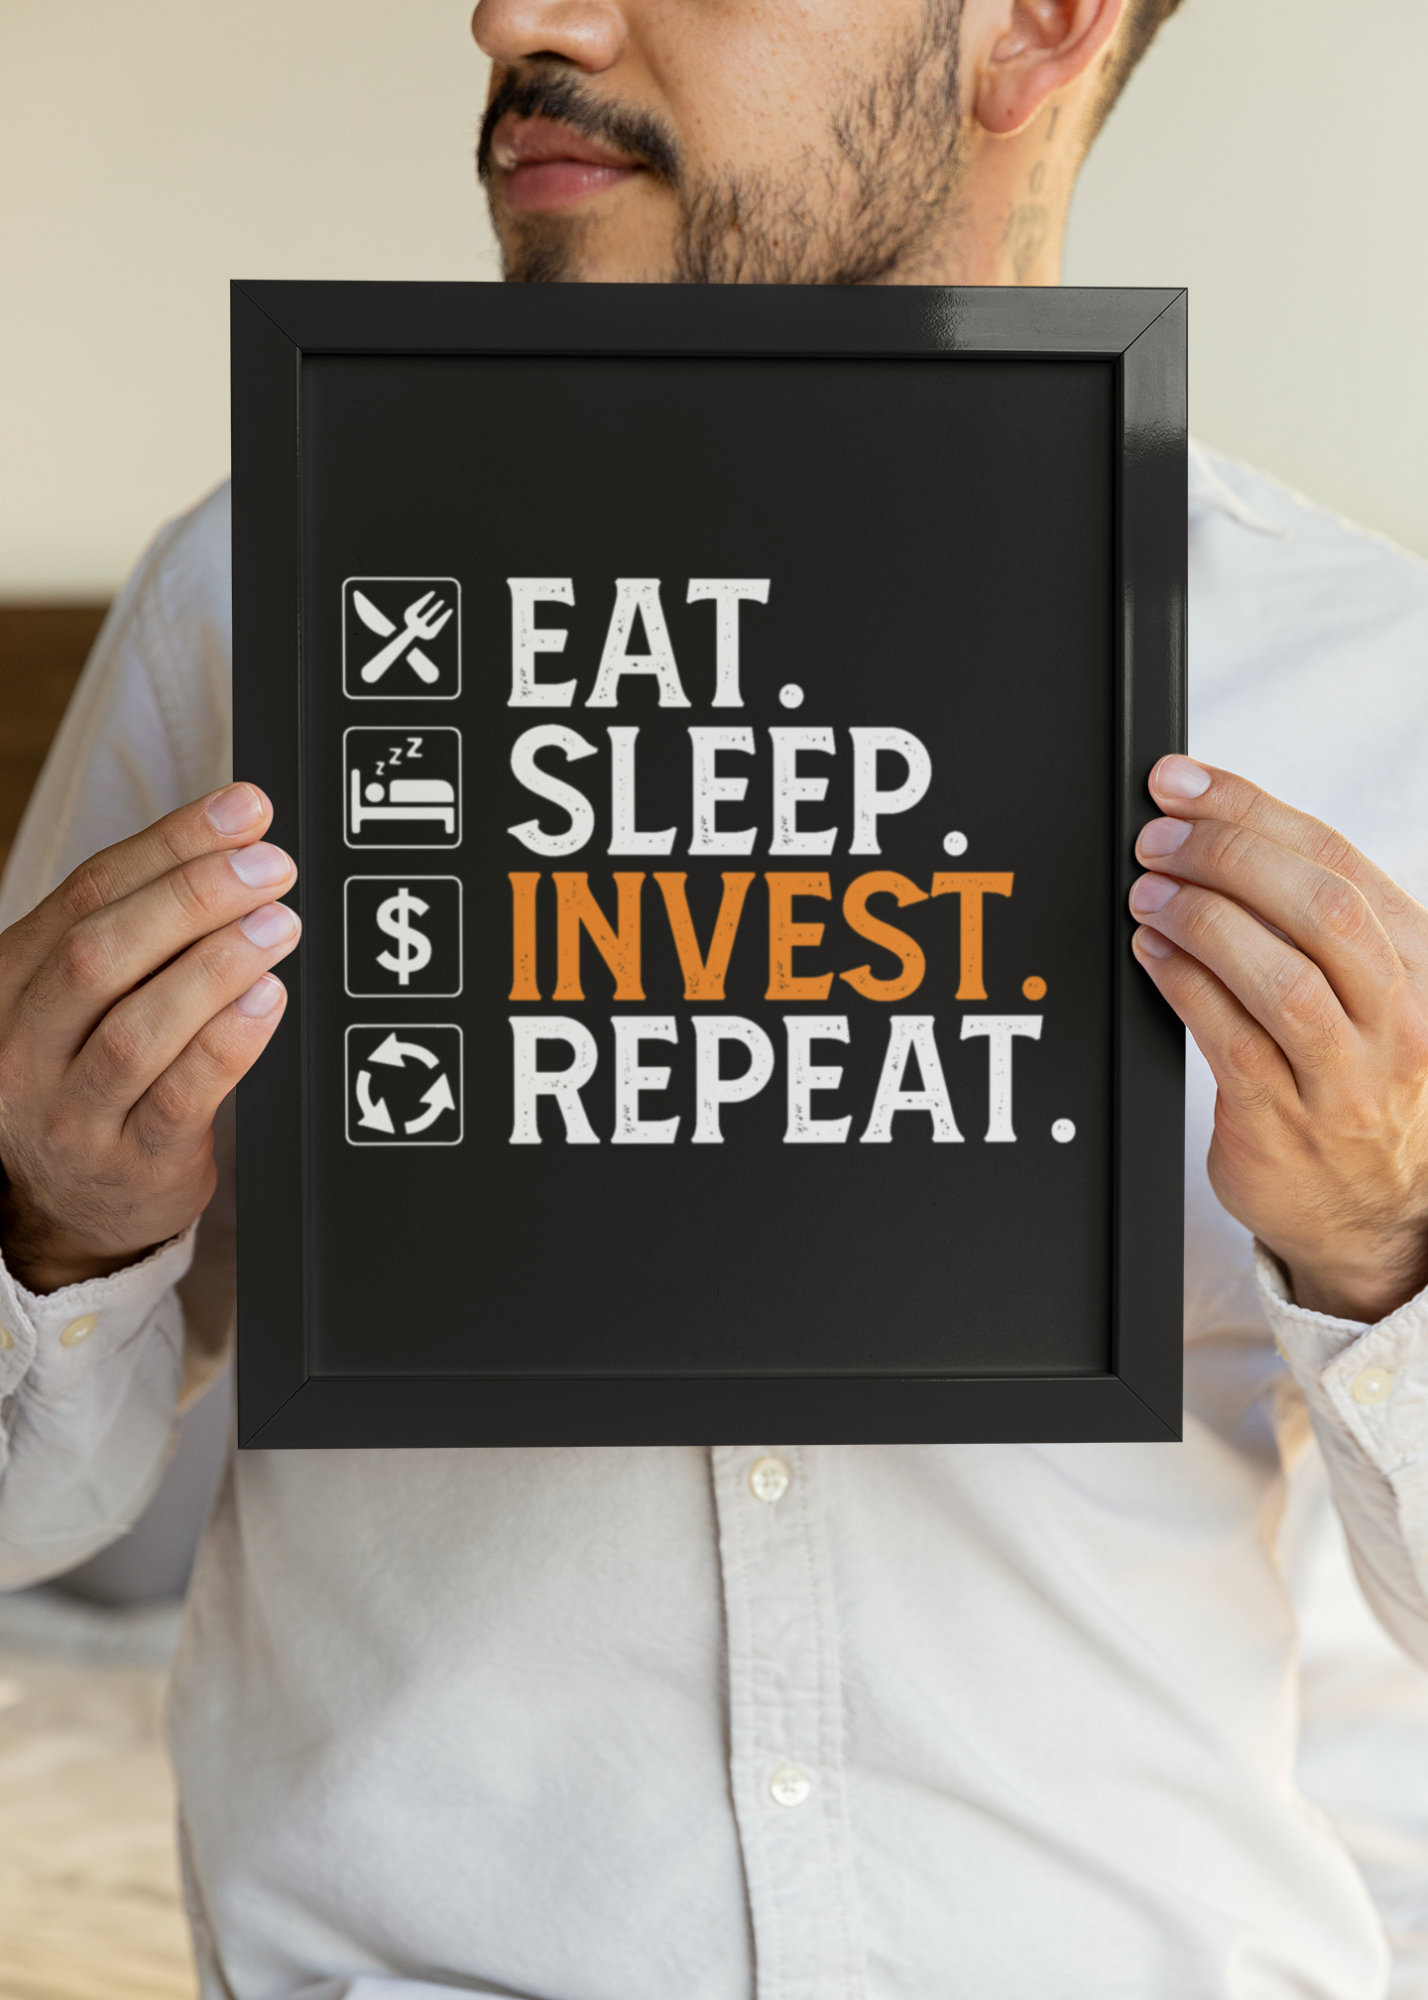 EAT. SLEEP. INVEST. REPEAT. FRAMED POSTER